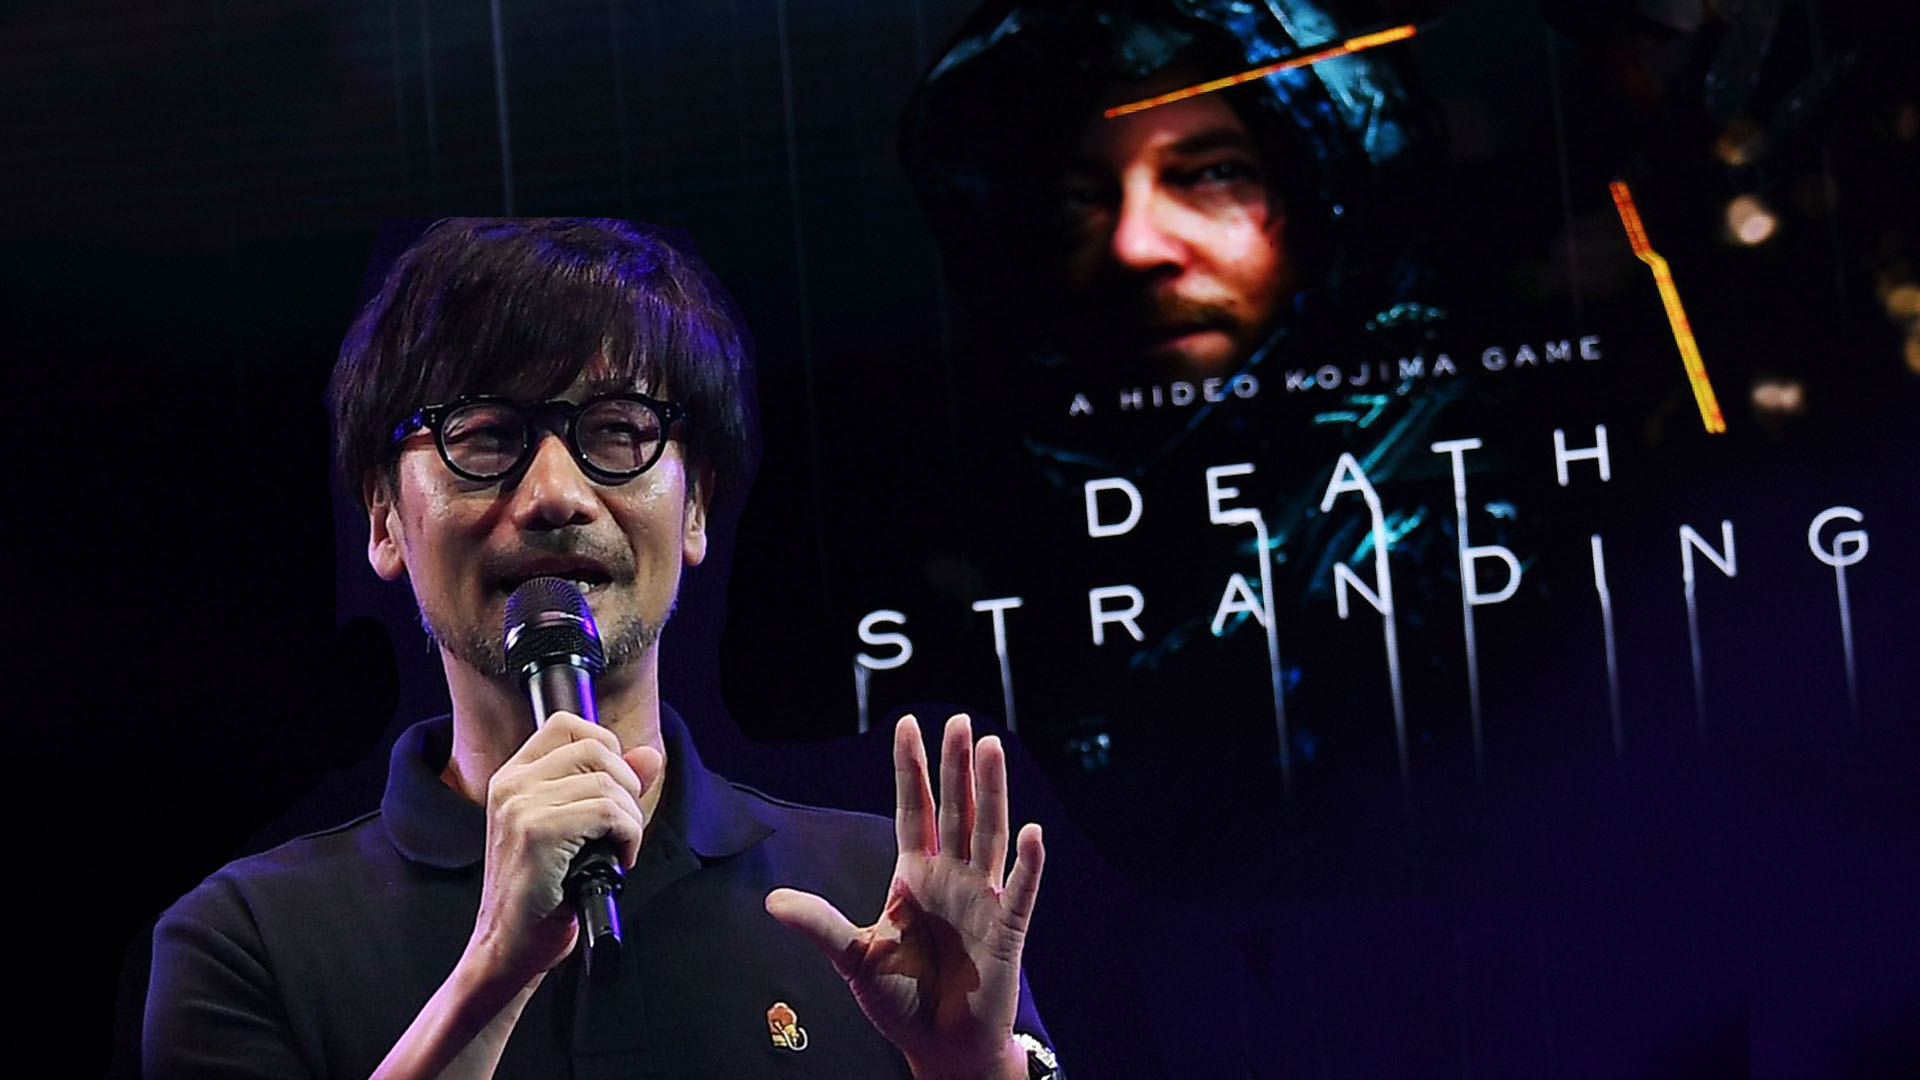 Fandom Gaming on X: Hideo Kojima says he put one of his game ideas on hold  because 'the concept was similar' to #TheBoys  To which 'The Boys'  creator gave the obvious